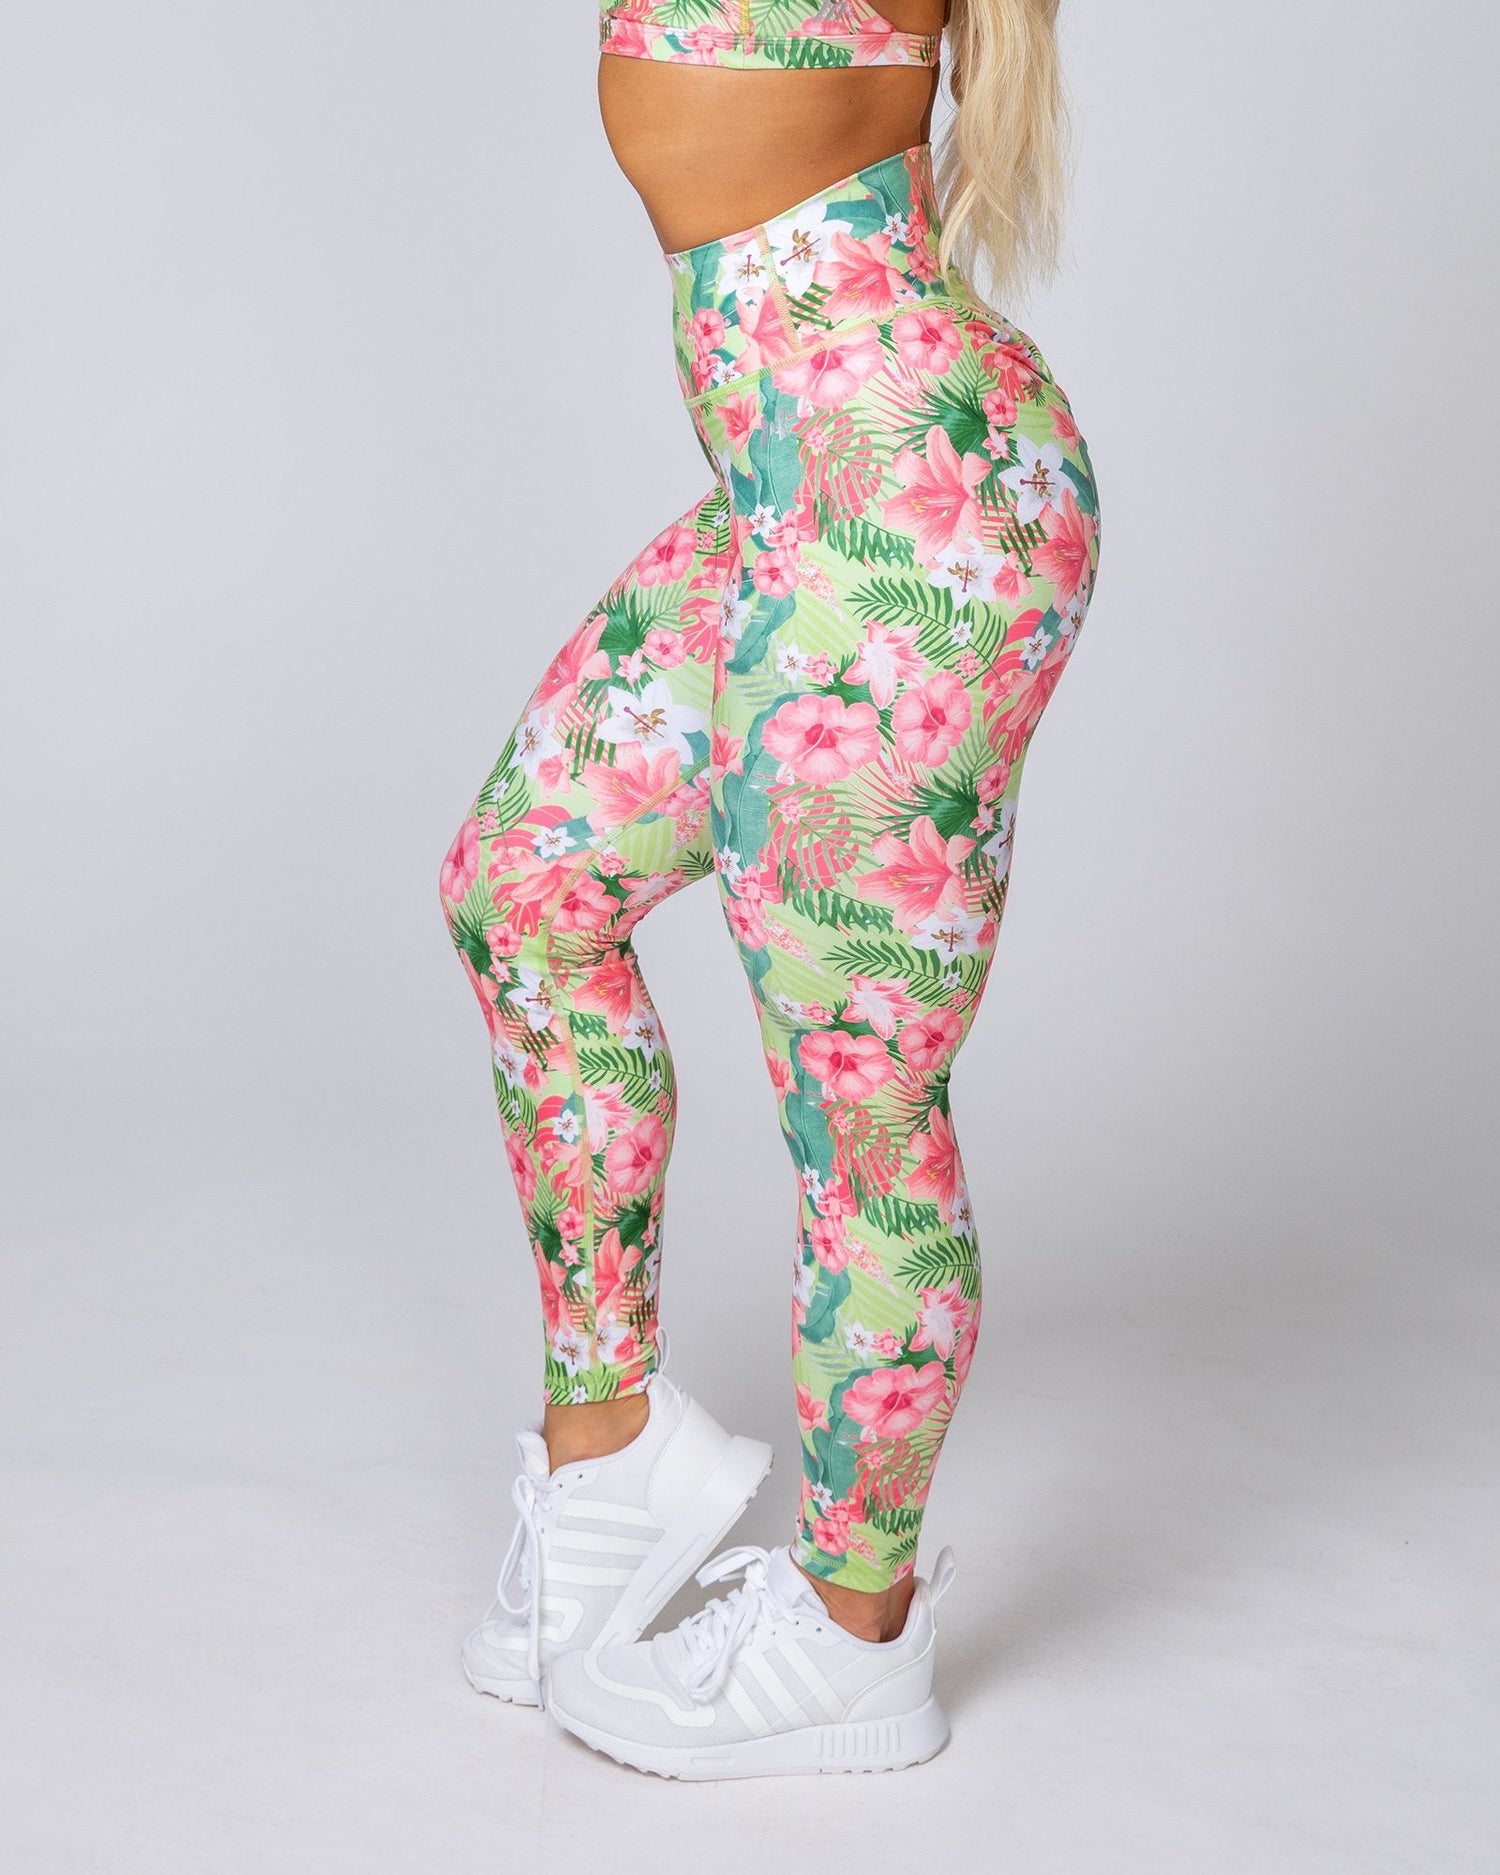 HBxMN Sweetheart Ankle Length Leggings - Tropical Floral